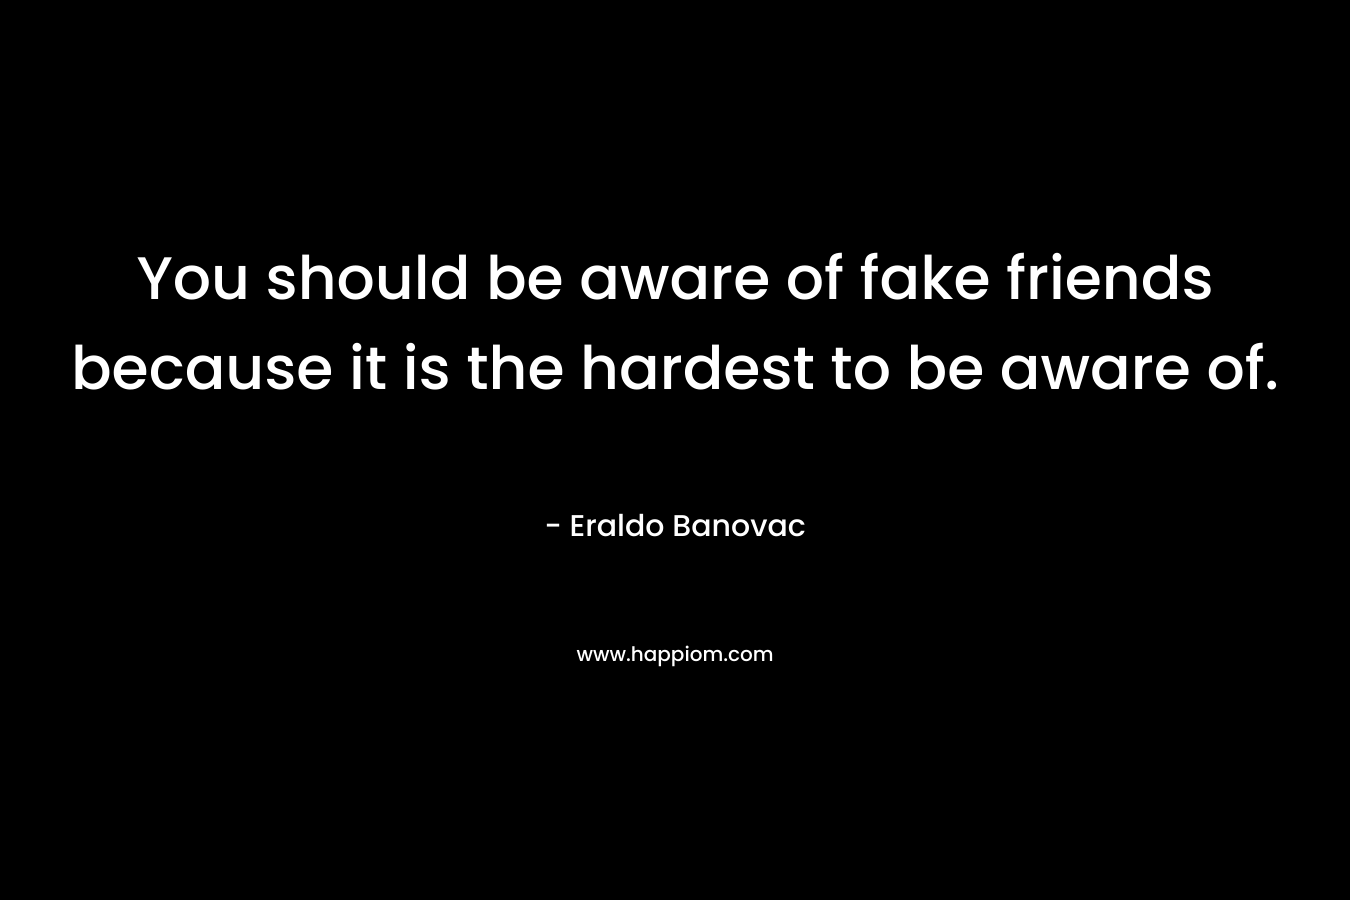 You should be aware of fake friends because it is the hardest to be aware of.